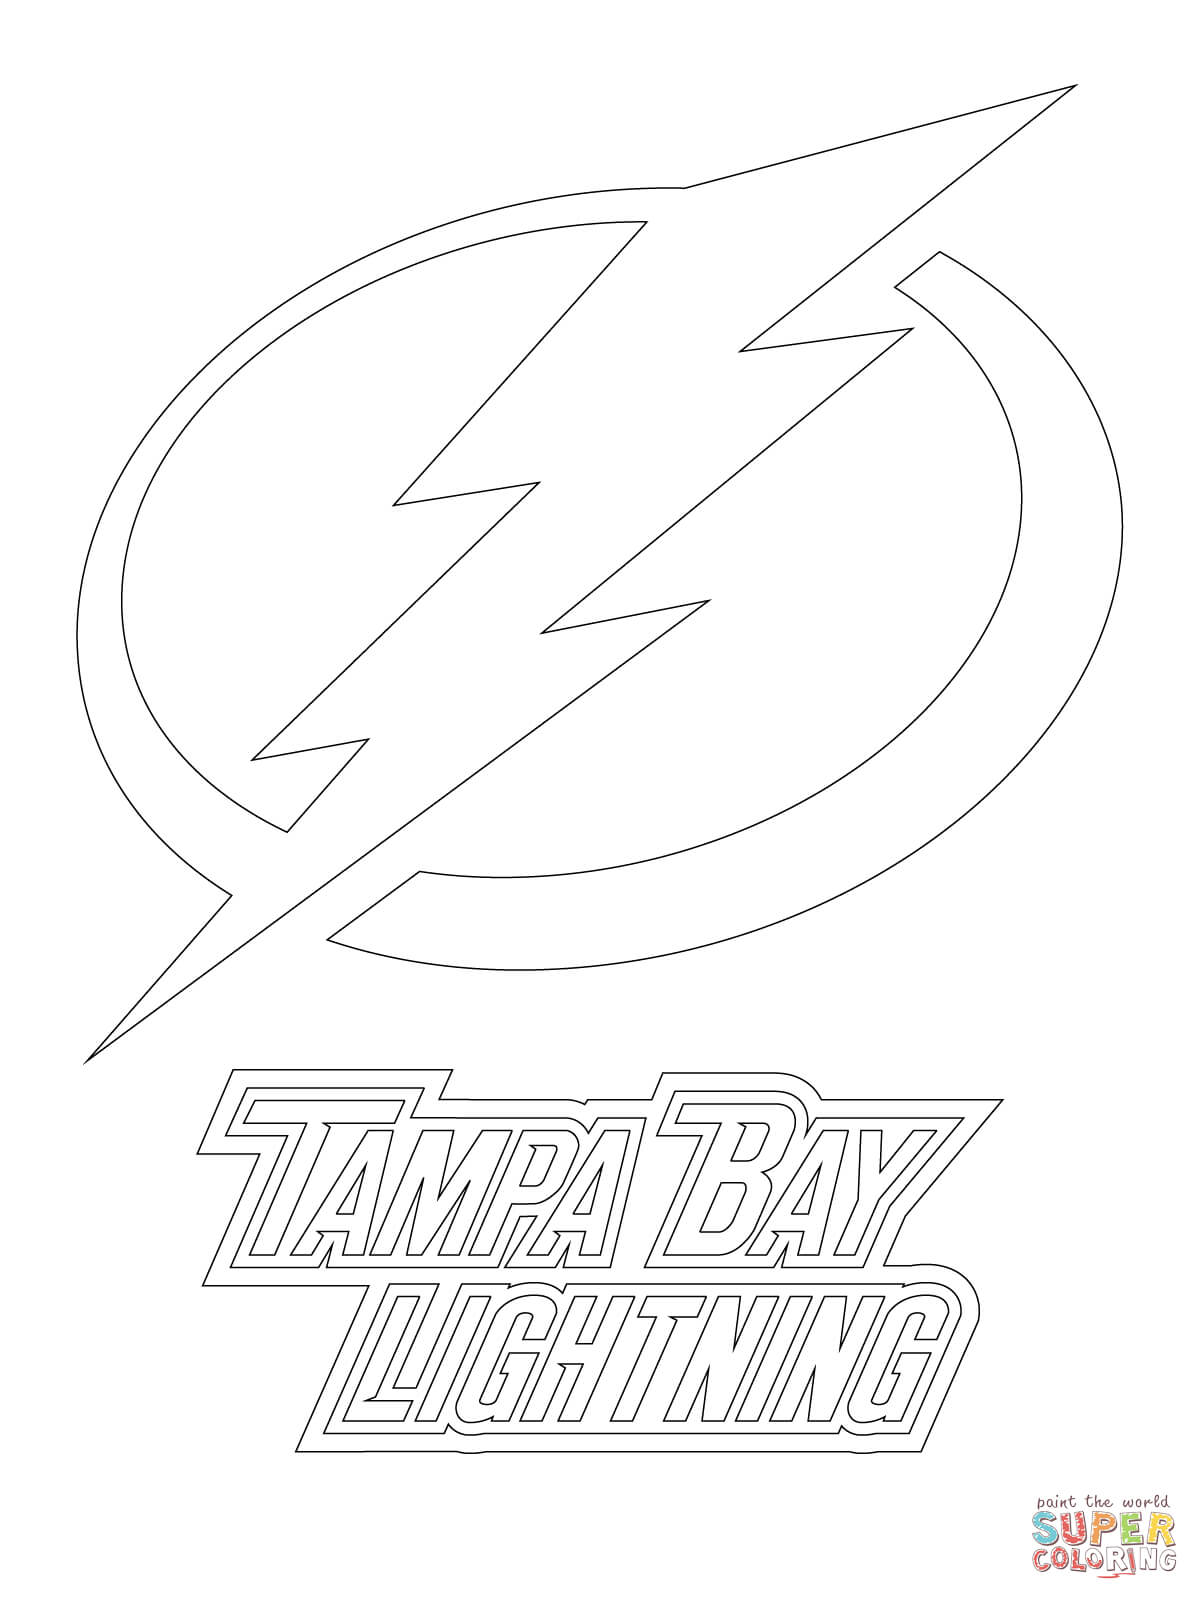 Tampa Bay Lightning Logo coloring page | Free Printable Coloring Pages